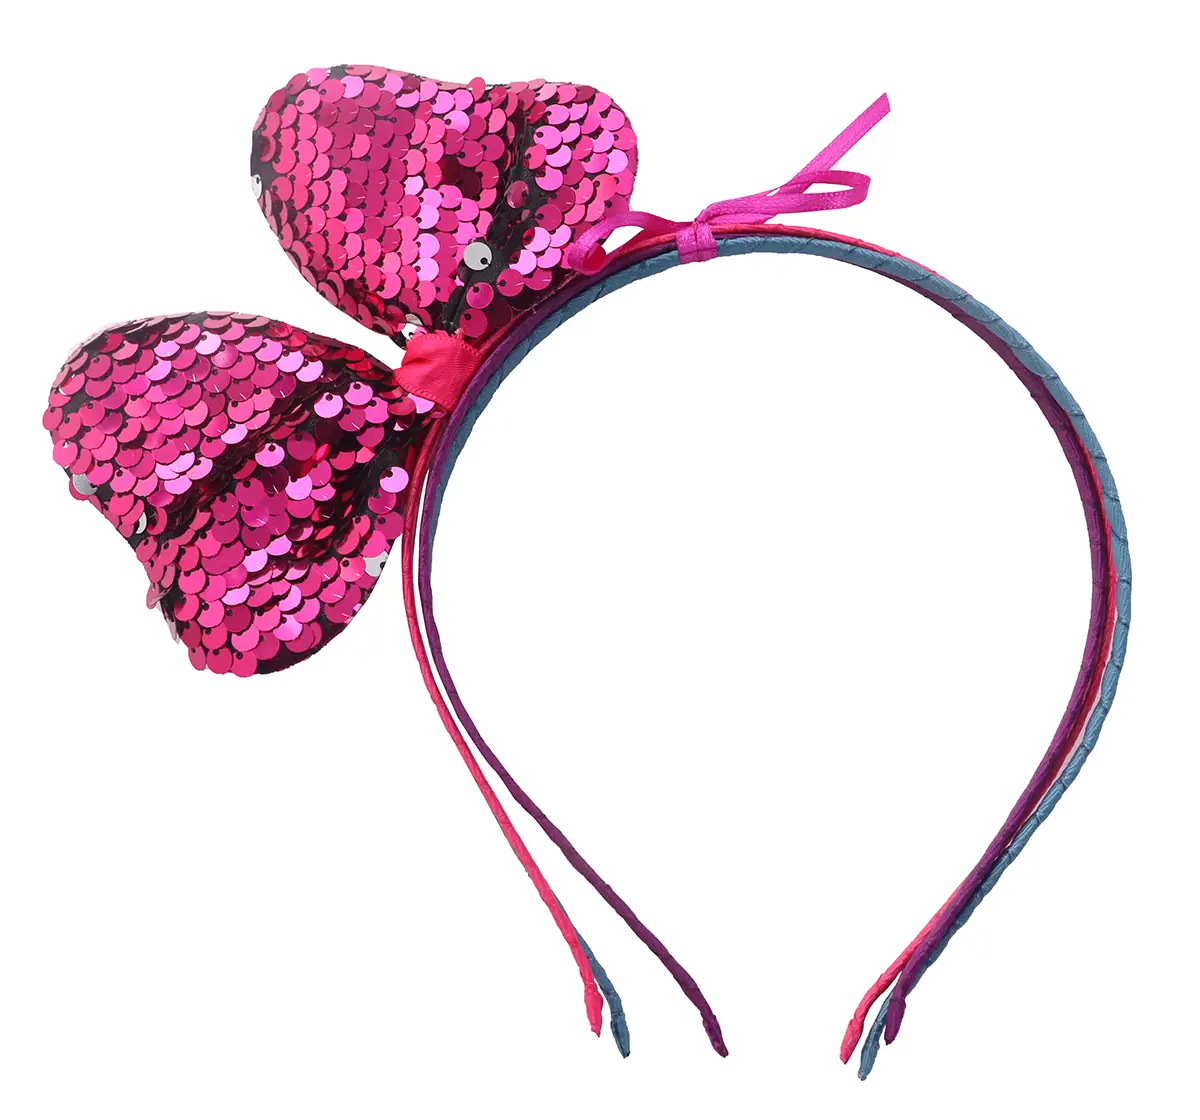 Li'l Diva Minnie Mouse Headband Pack of 3 For Girls Ages 3Y+, Multicolour